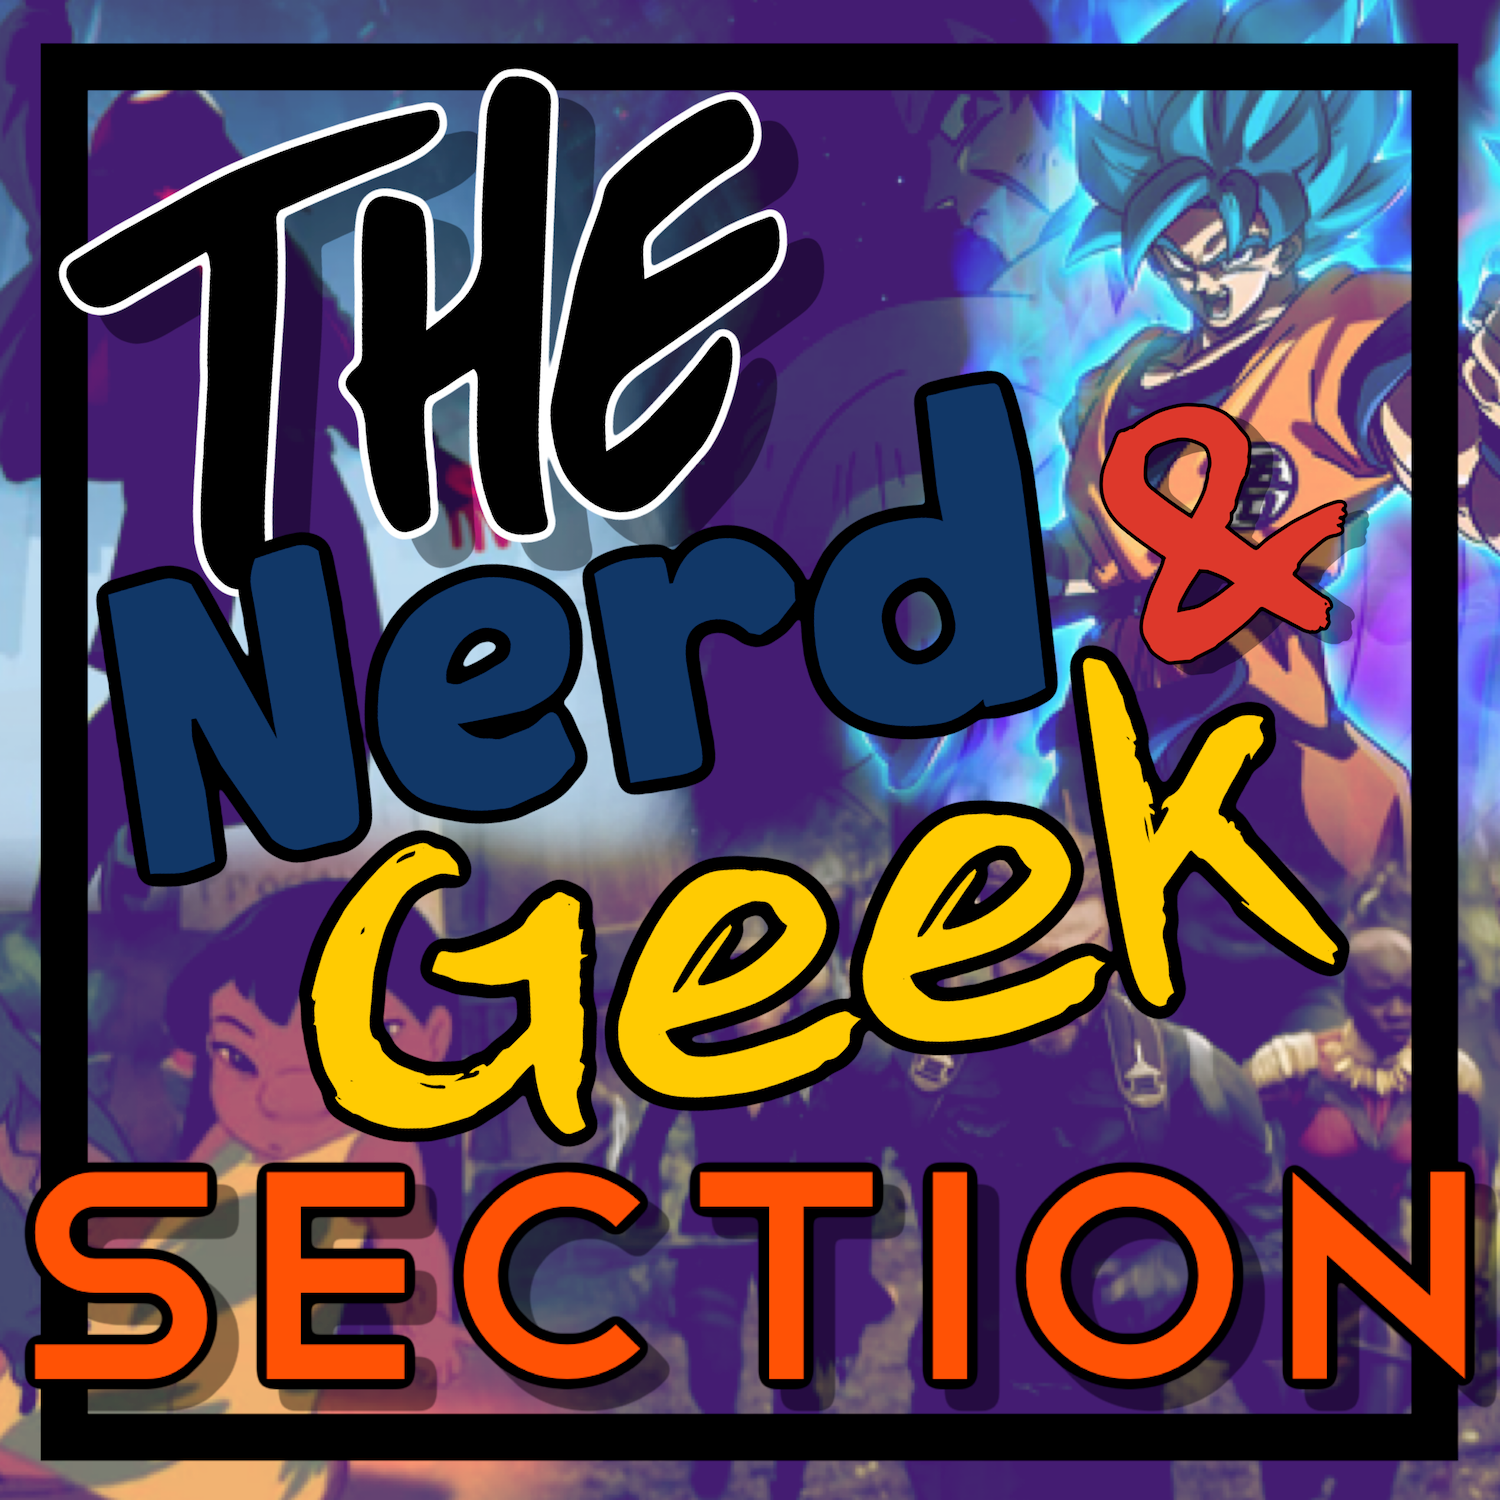 The Nerd & Geek Section! Podcast